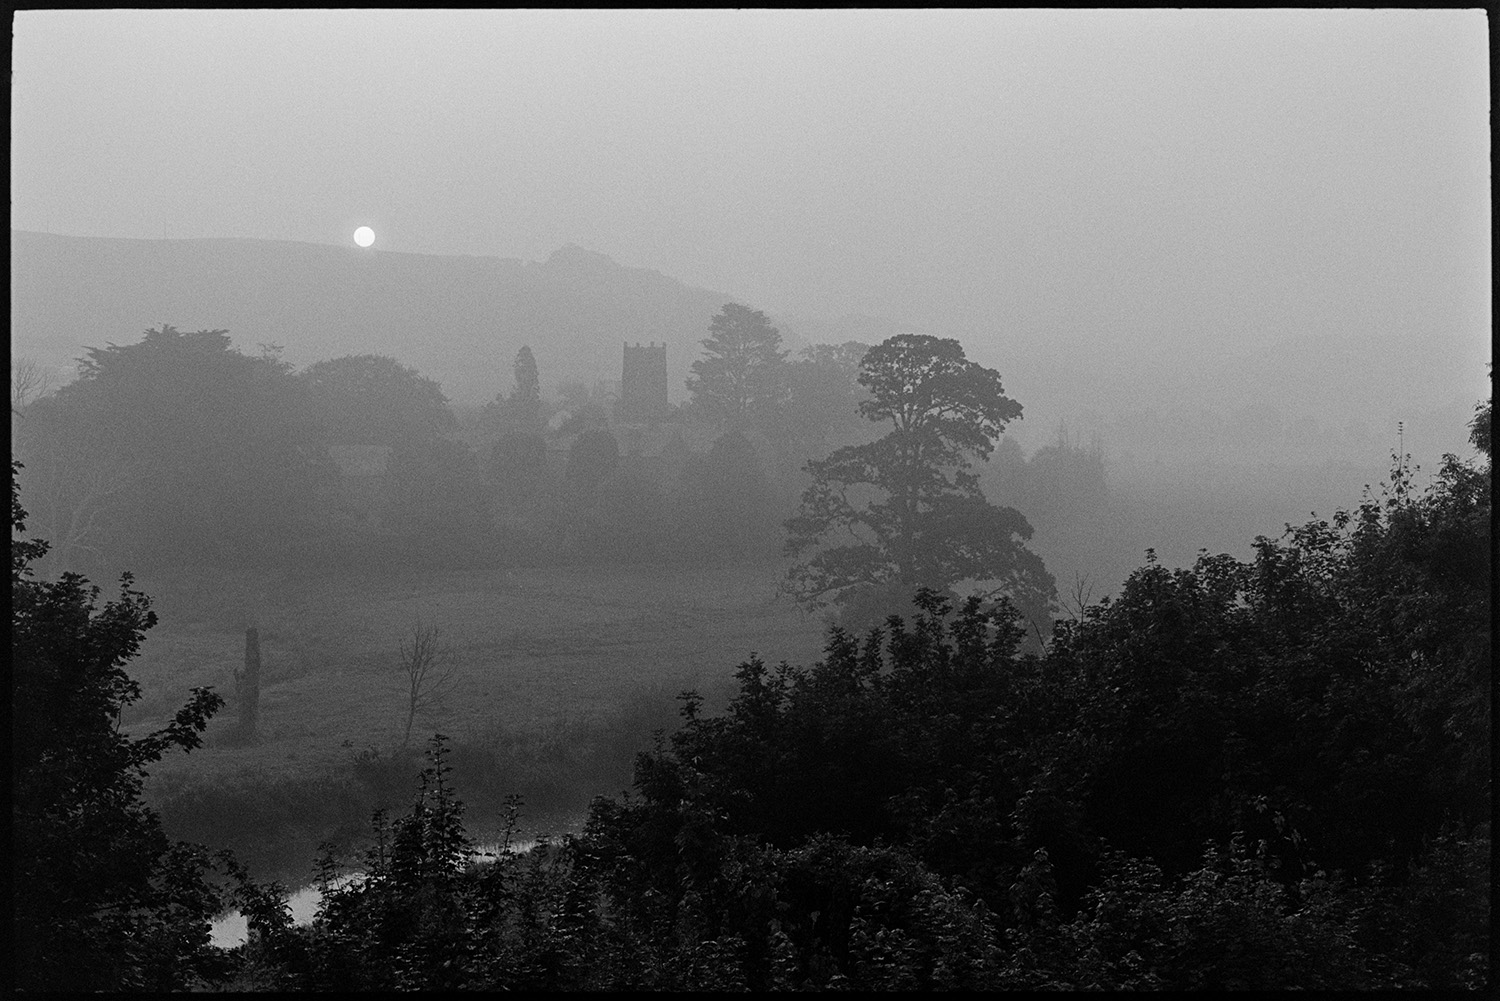 Sun rising over river and church. 
[The sun rising over a landscape at Weare Giffard. The church, surrounded by trees, is visible and the River Torridge can be seen in the foreground.]